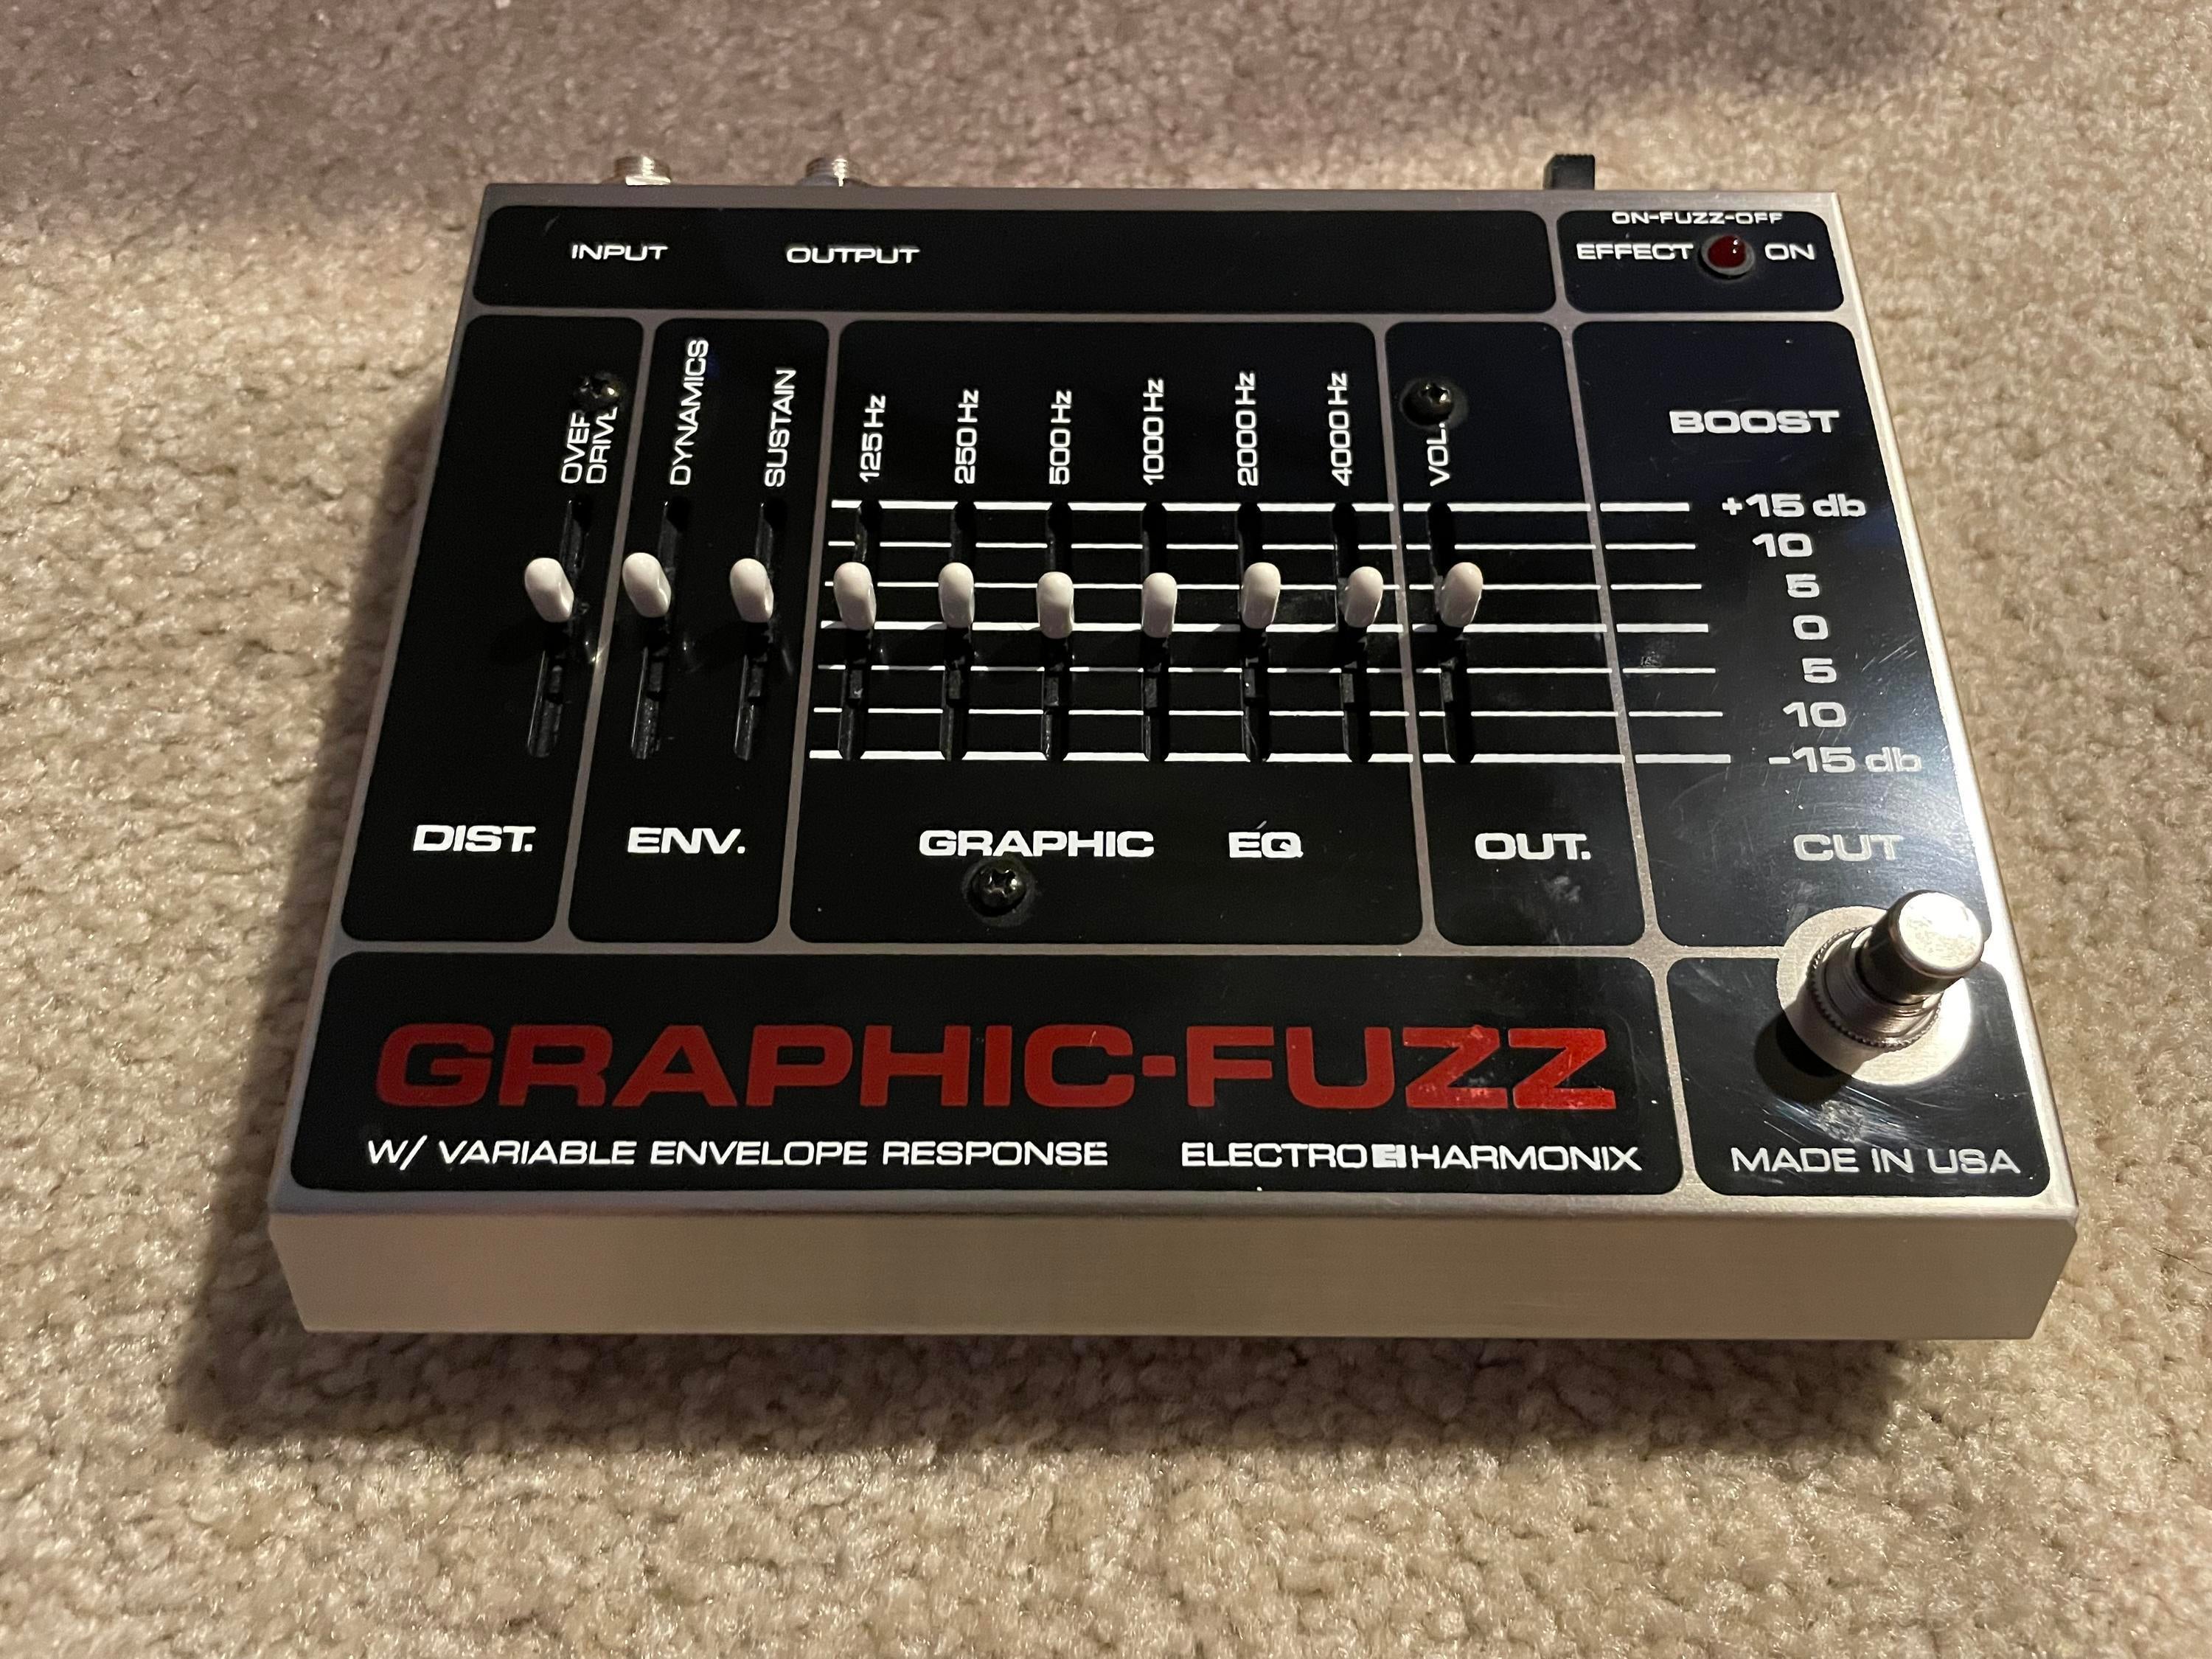 Used Electro-Harmonix Graphic Fuzz Pedal - Sweetwater's Gear Exchange